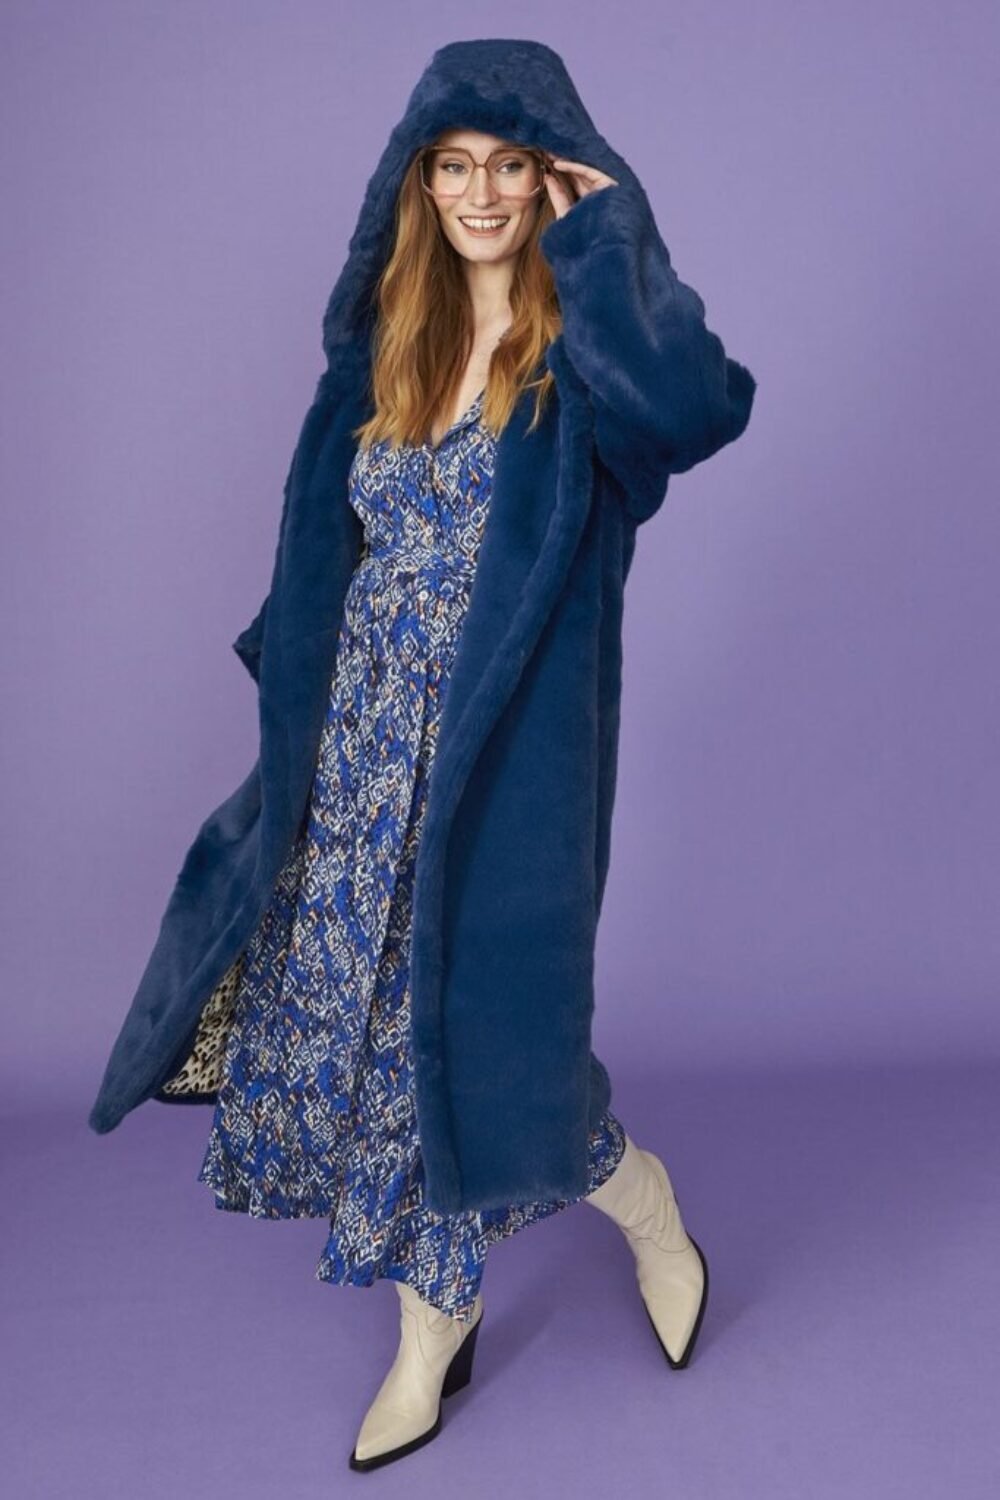 Shop Lux Bold Blue Hooded Faux Fur Coat with Button Fastening and women's luxury and designer clothes at www.lux-apparel.co.uk